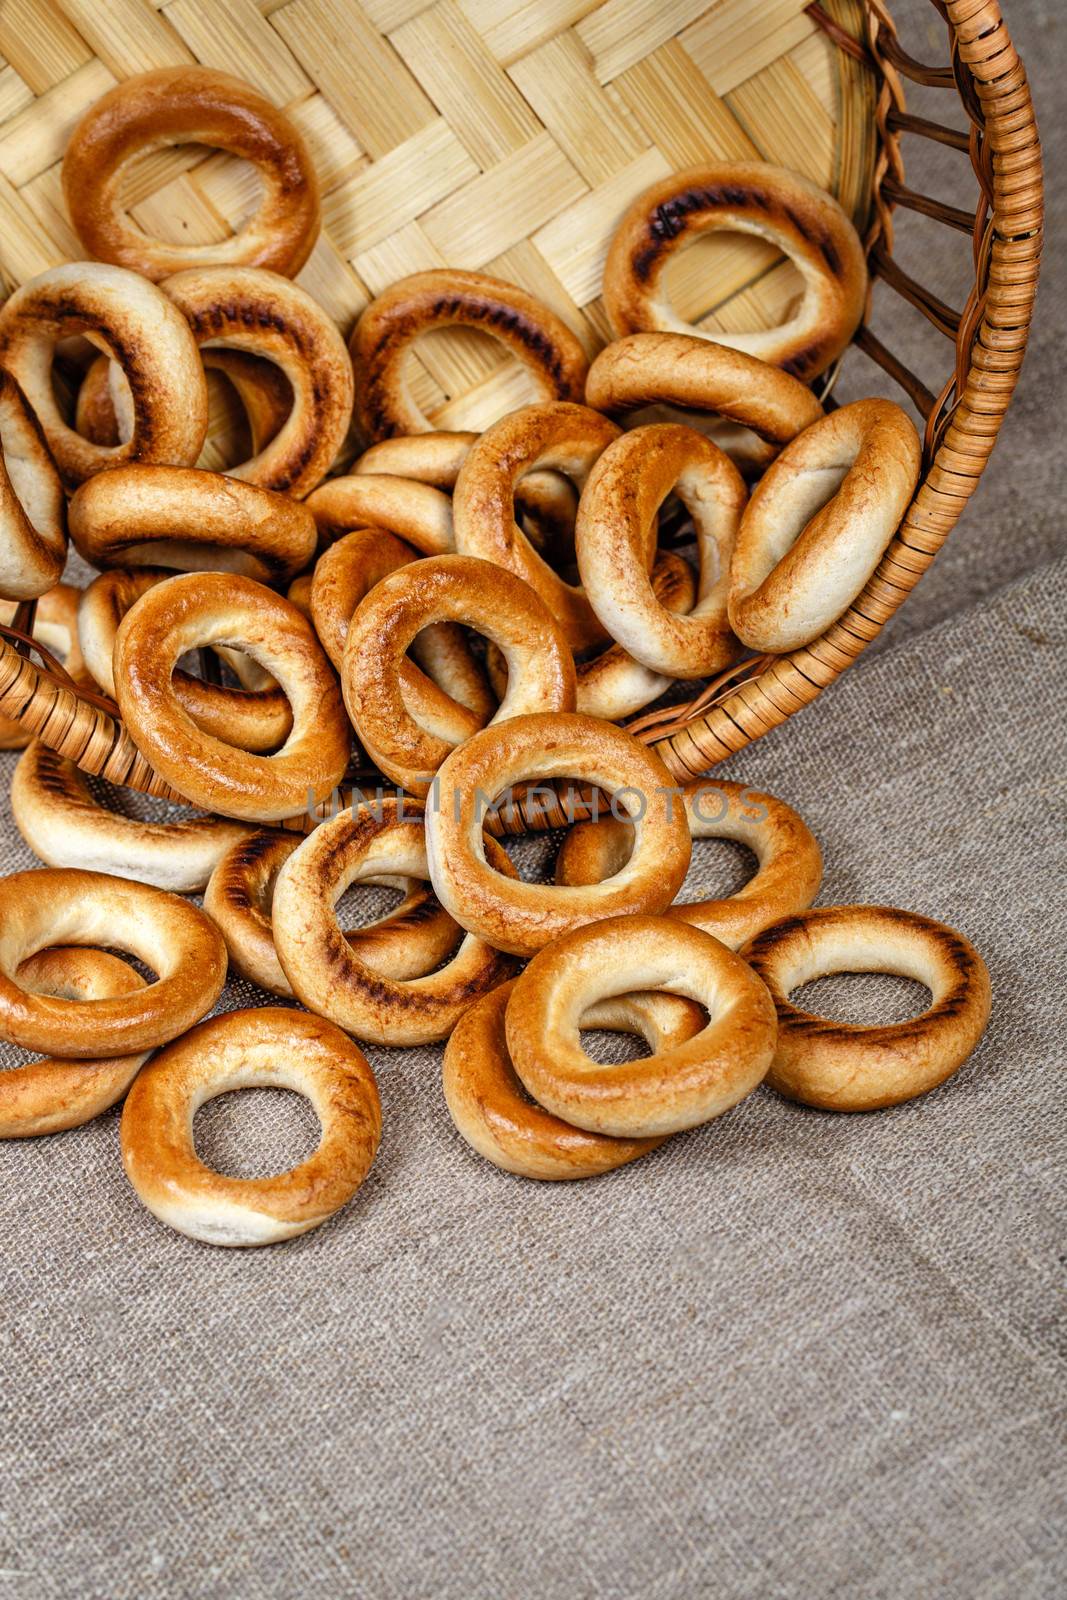 Russian traditional bagels in a wicker basket close-up shot